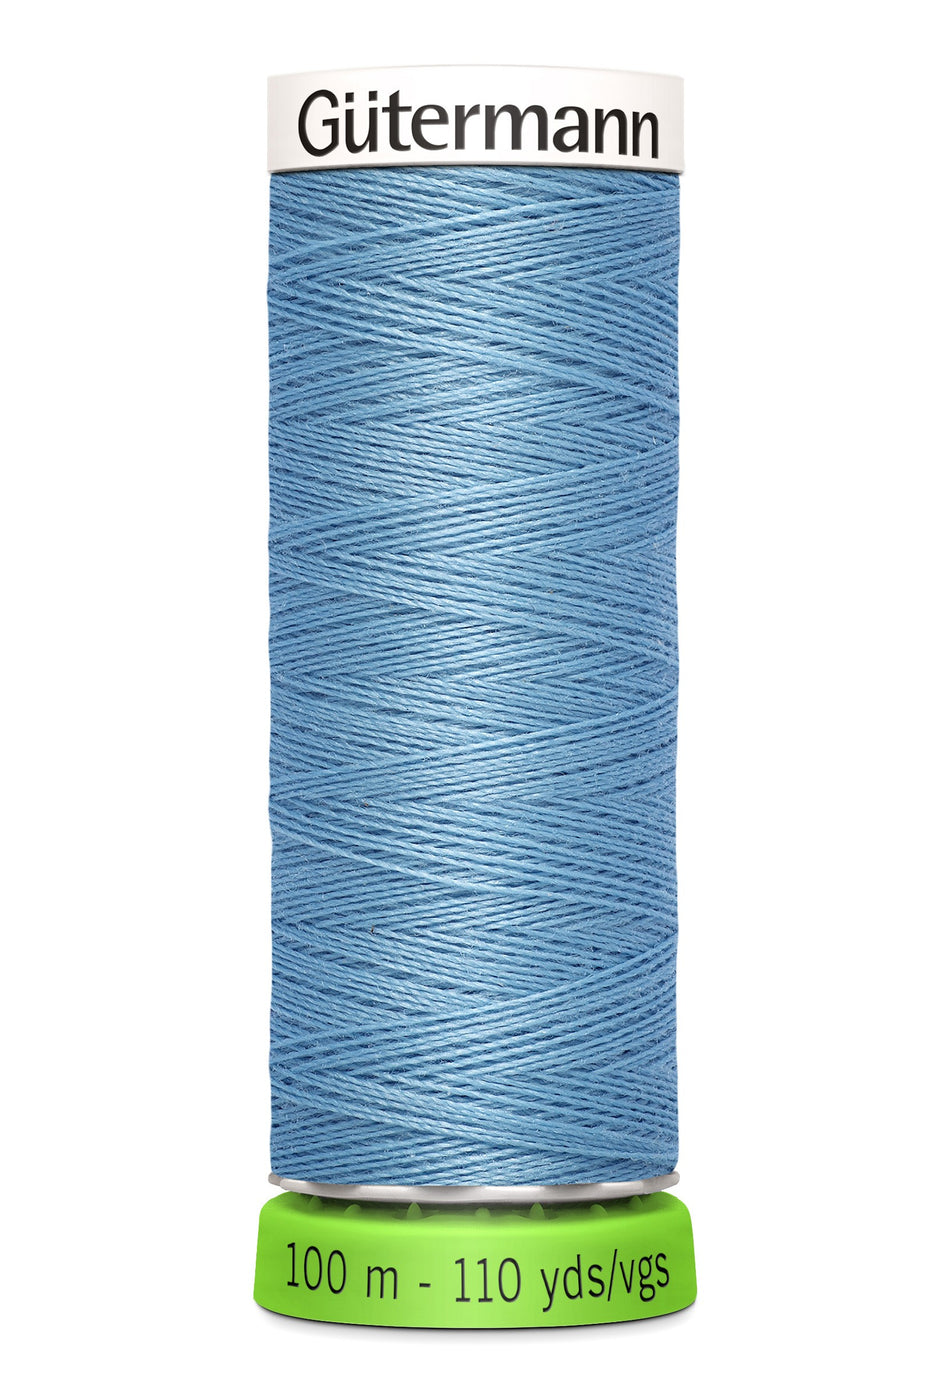 Gutermann rPet Recycled Polyester Thread 143 Copen Blue 110yd/100m